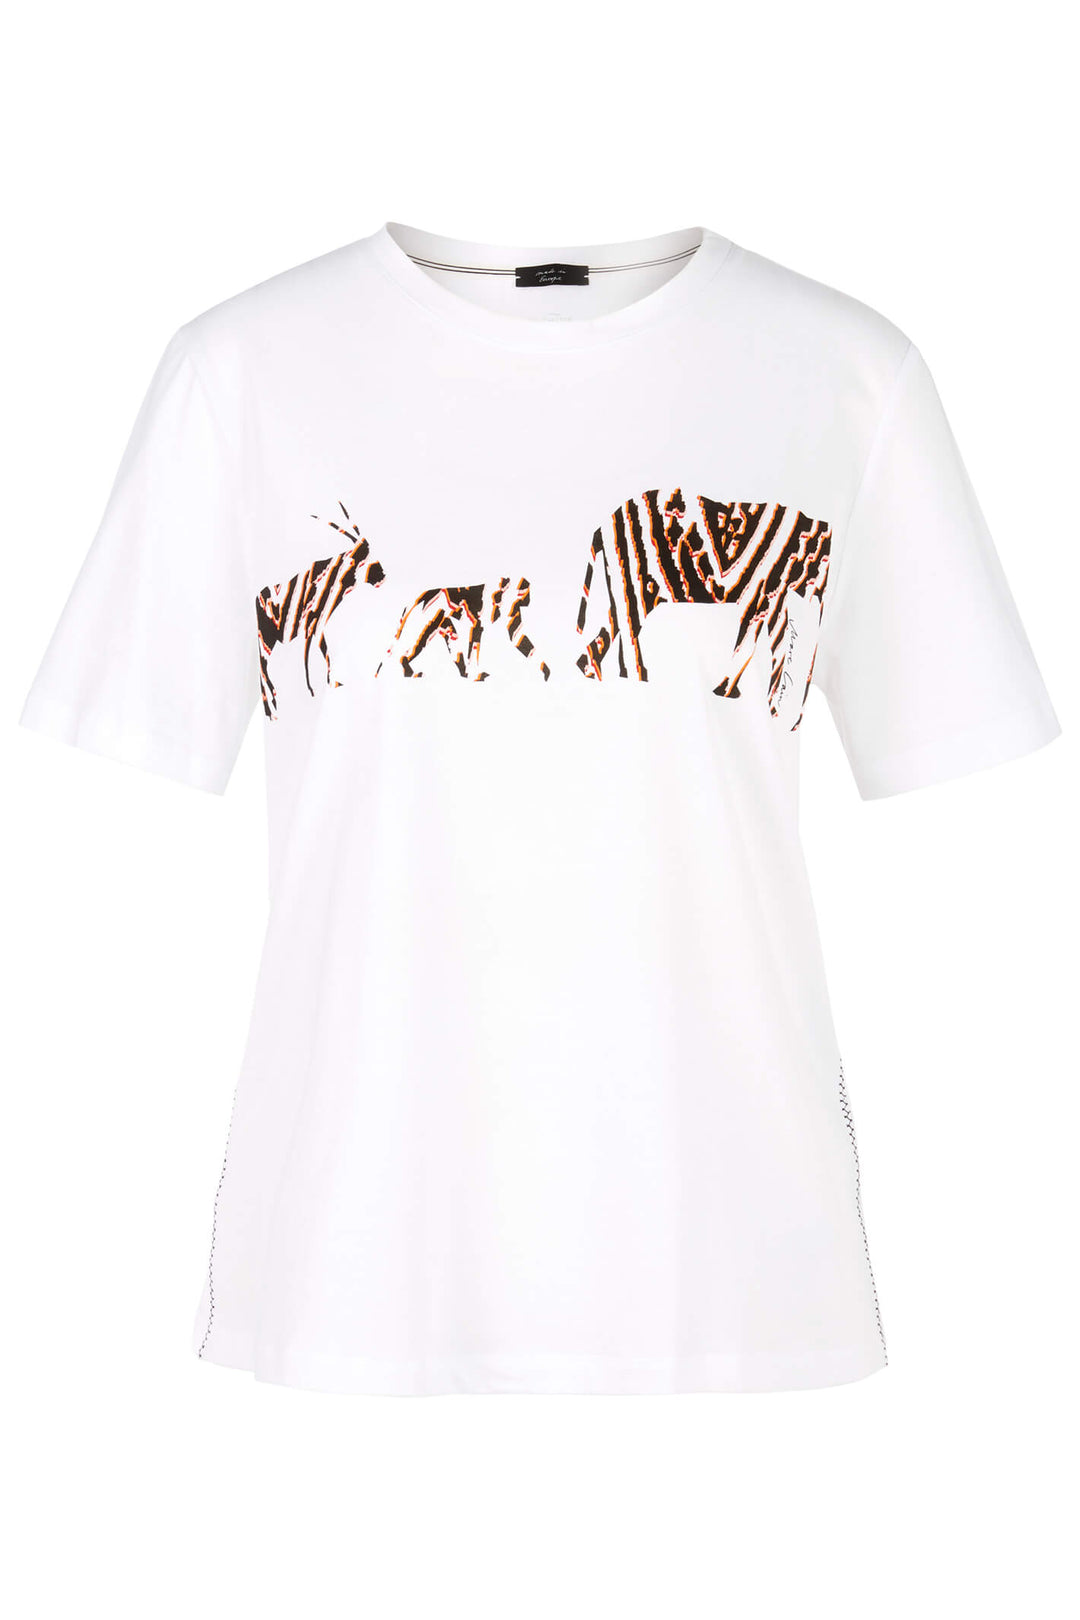 Marc Cain Collection UC 48.10 J81 White African Fairy Tale Motif T-Shirt - Olivia Grace Fashion